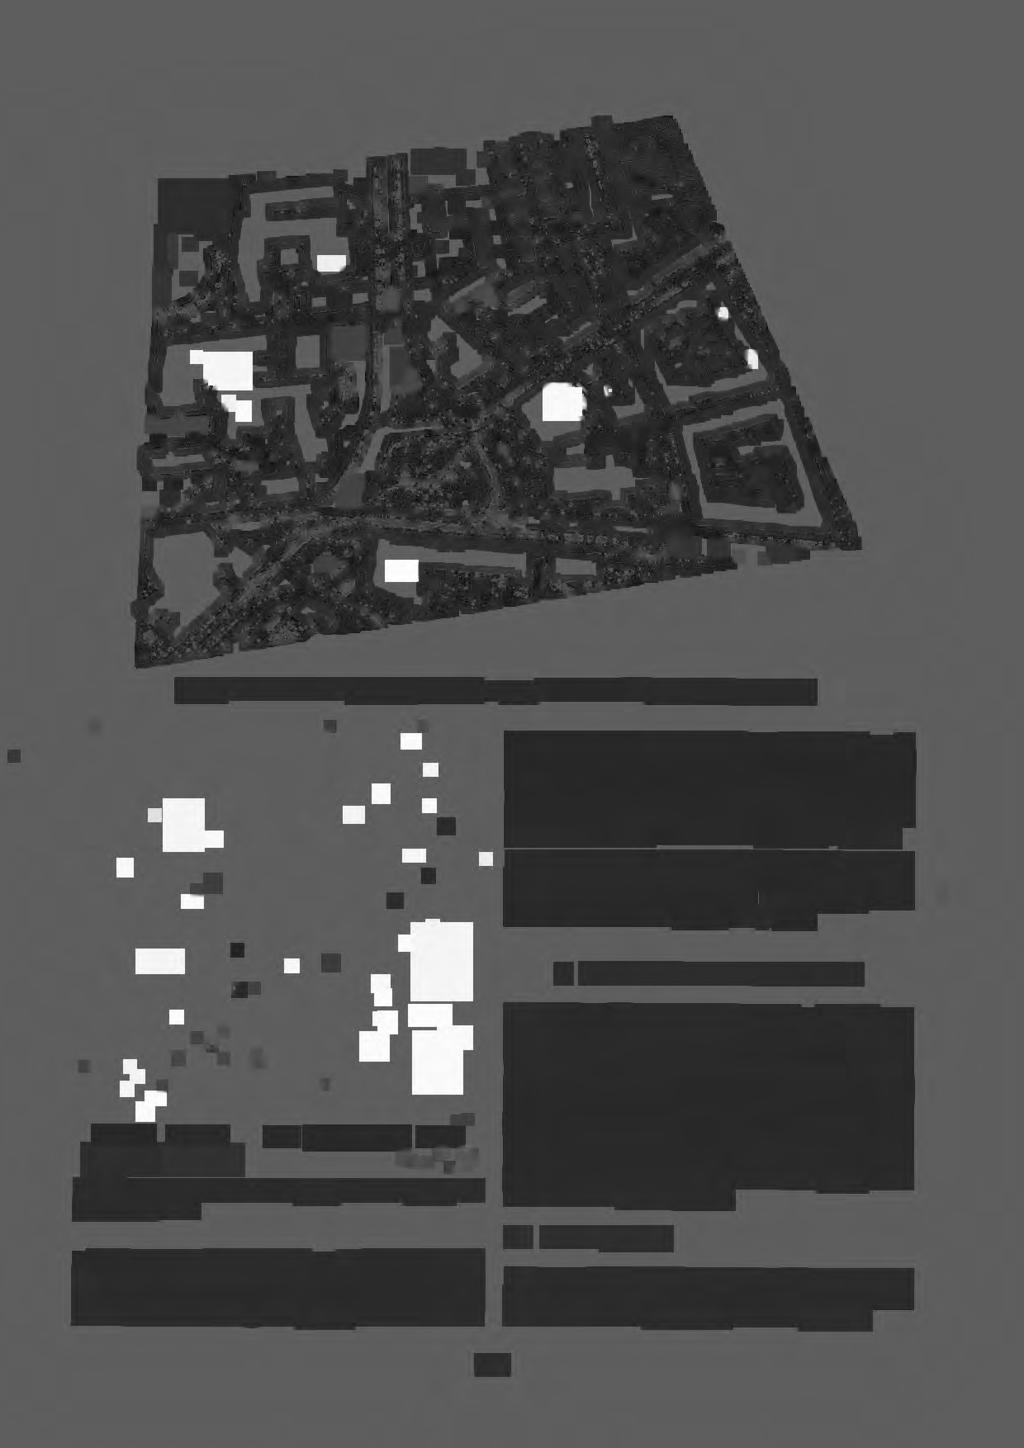 Figure 9 shows the result of the utilized ISODTA algorithm, which is used to discriminate the classes building, tree, street, grass-covered and shadow.